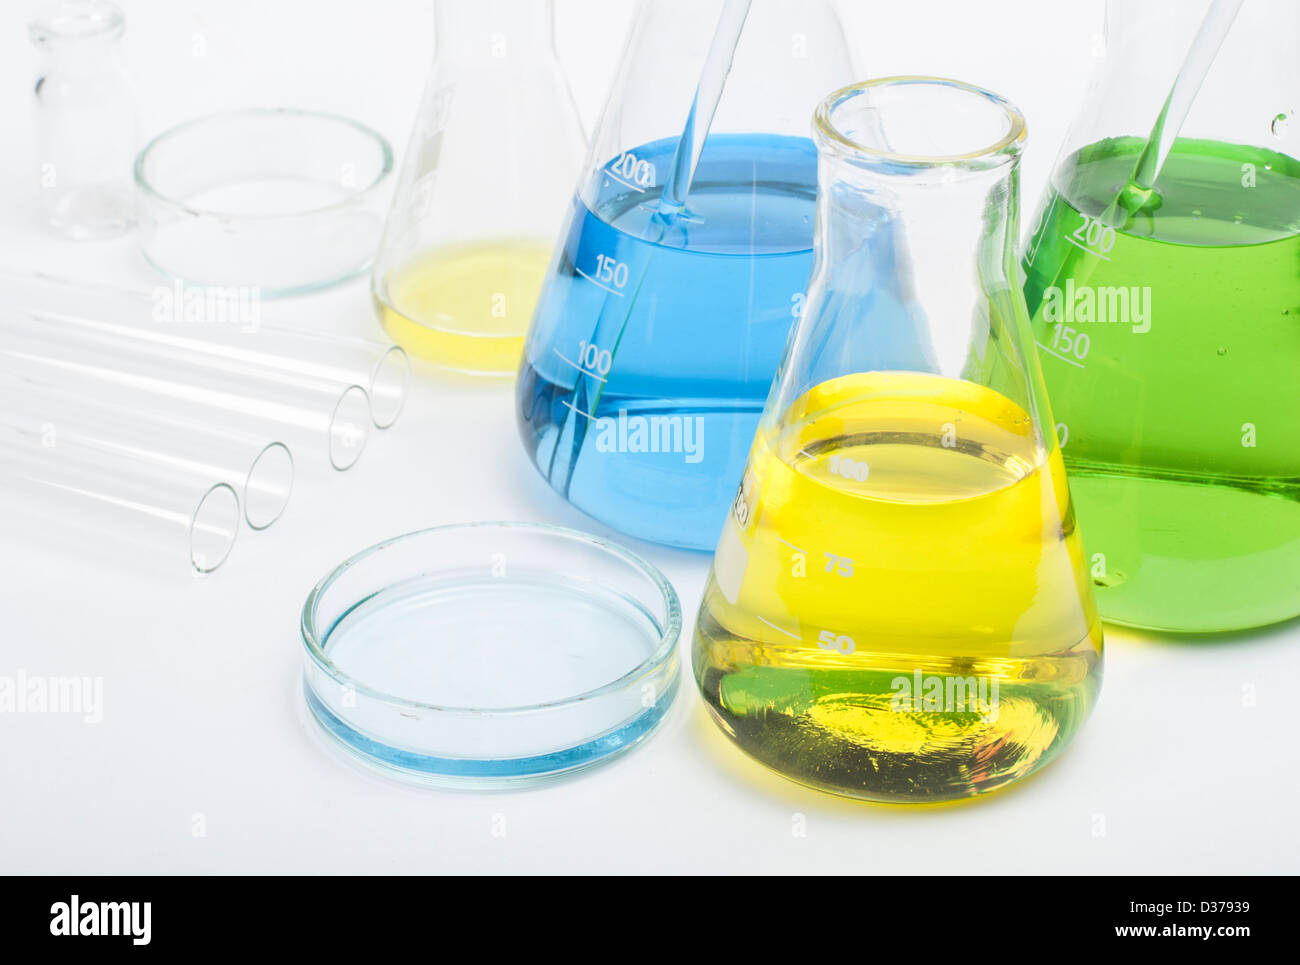 Laboratory glassware equipment. Laboratory beakers filled with colored liquid substances Stock Photo